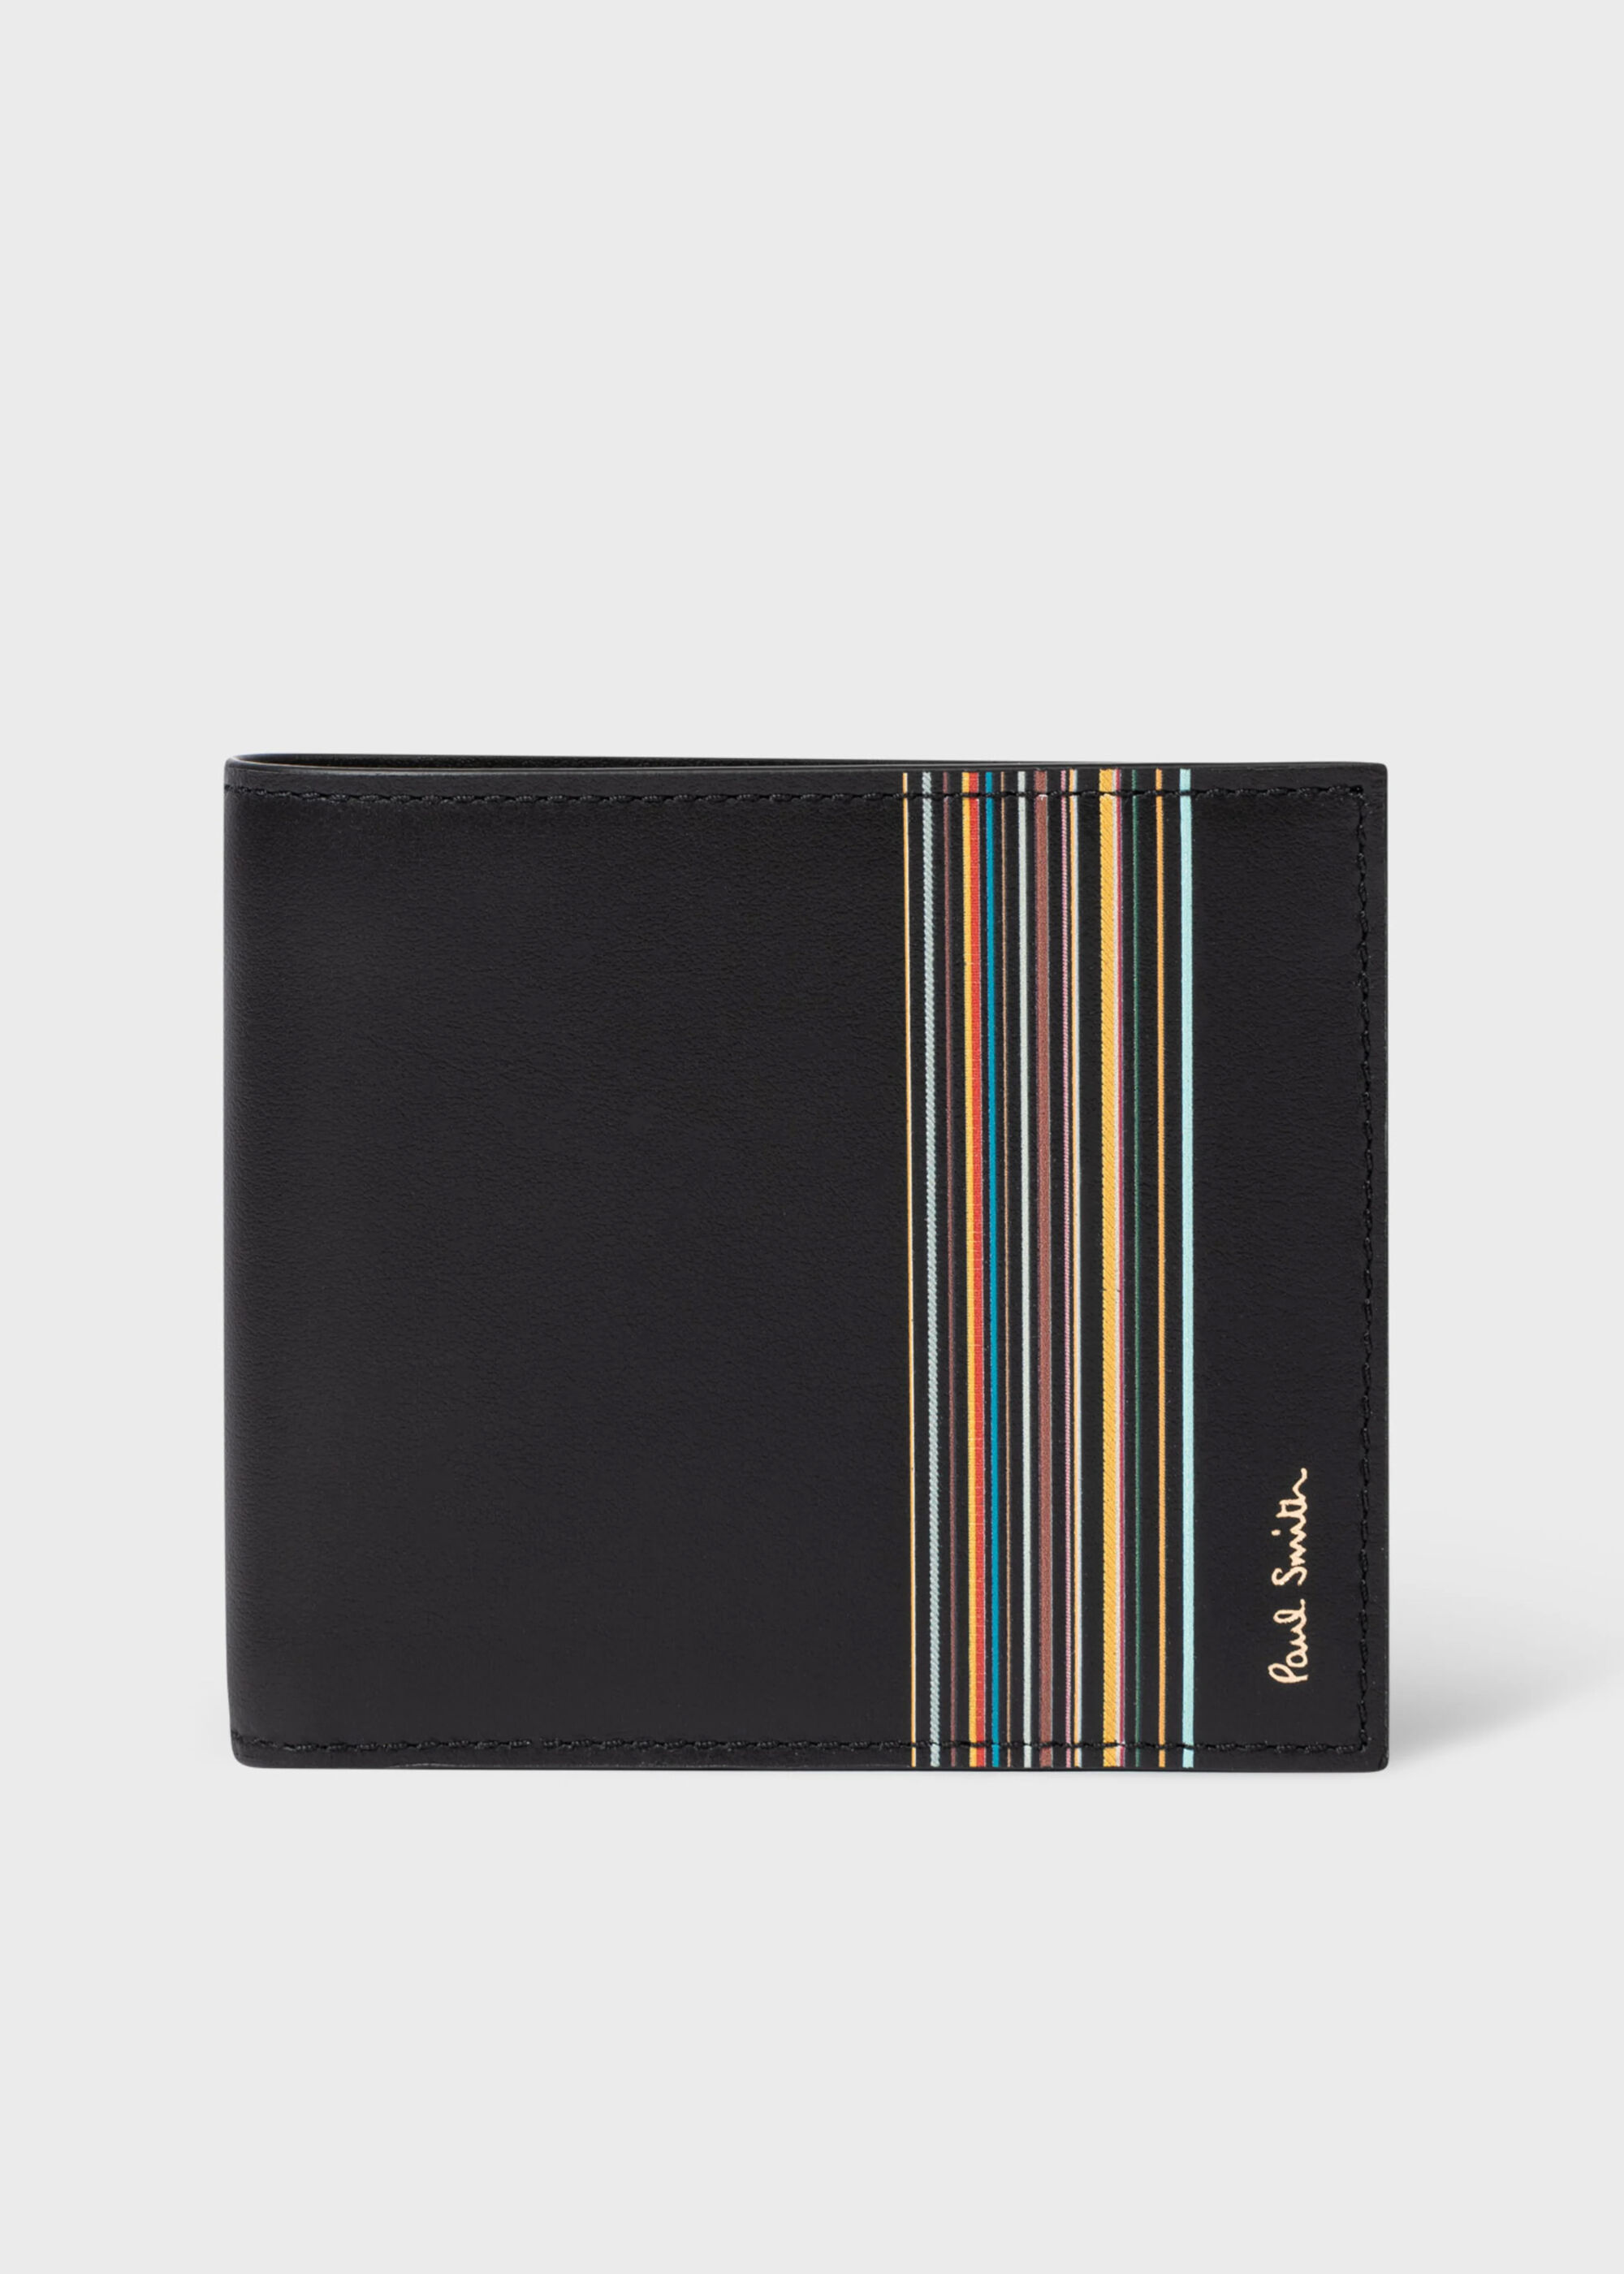 The Wick - Objects Black 'Signature Stripe Block' Billfold And Coin Wallet, by Paul Smith